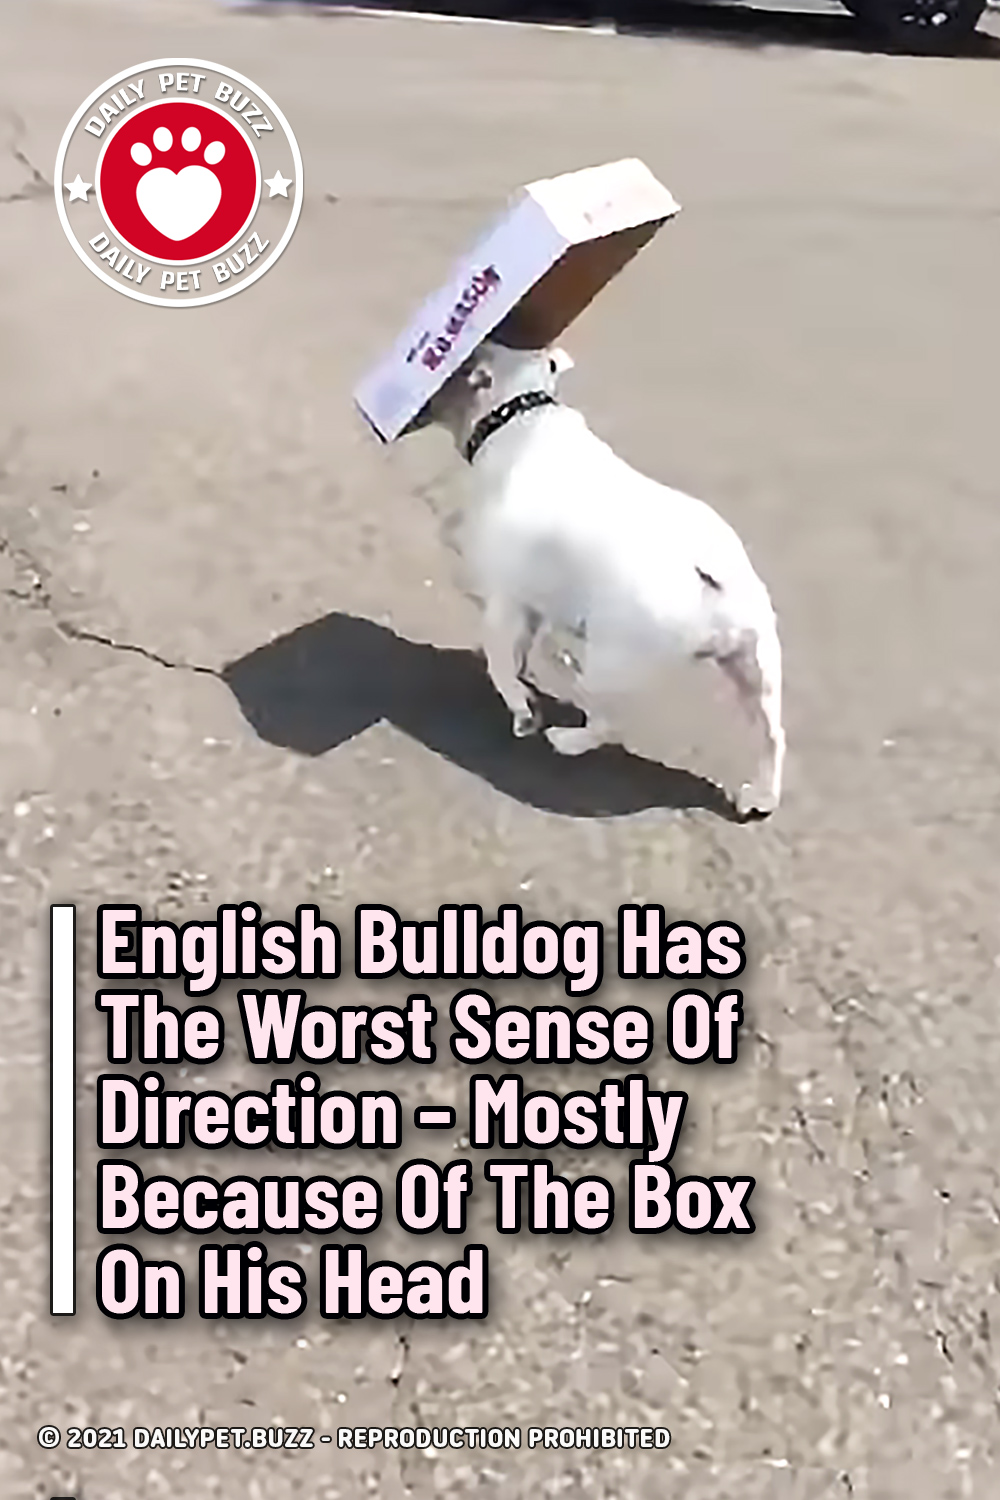 English Bulldog Has The Worst Sense Of Direction – Mostly Because Of The Box On His Head